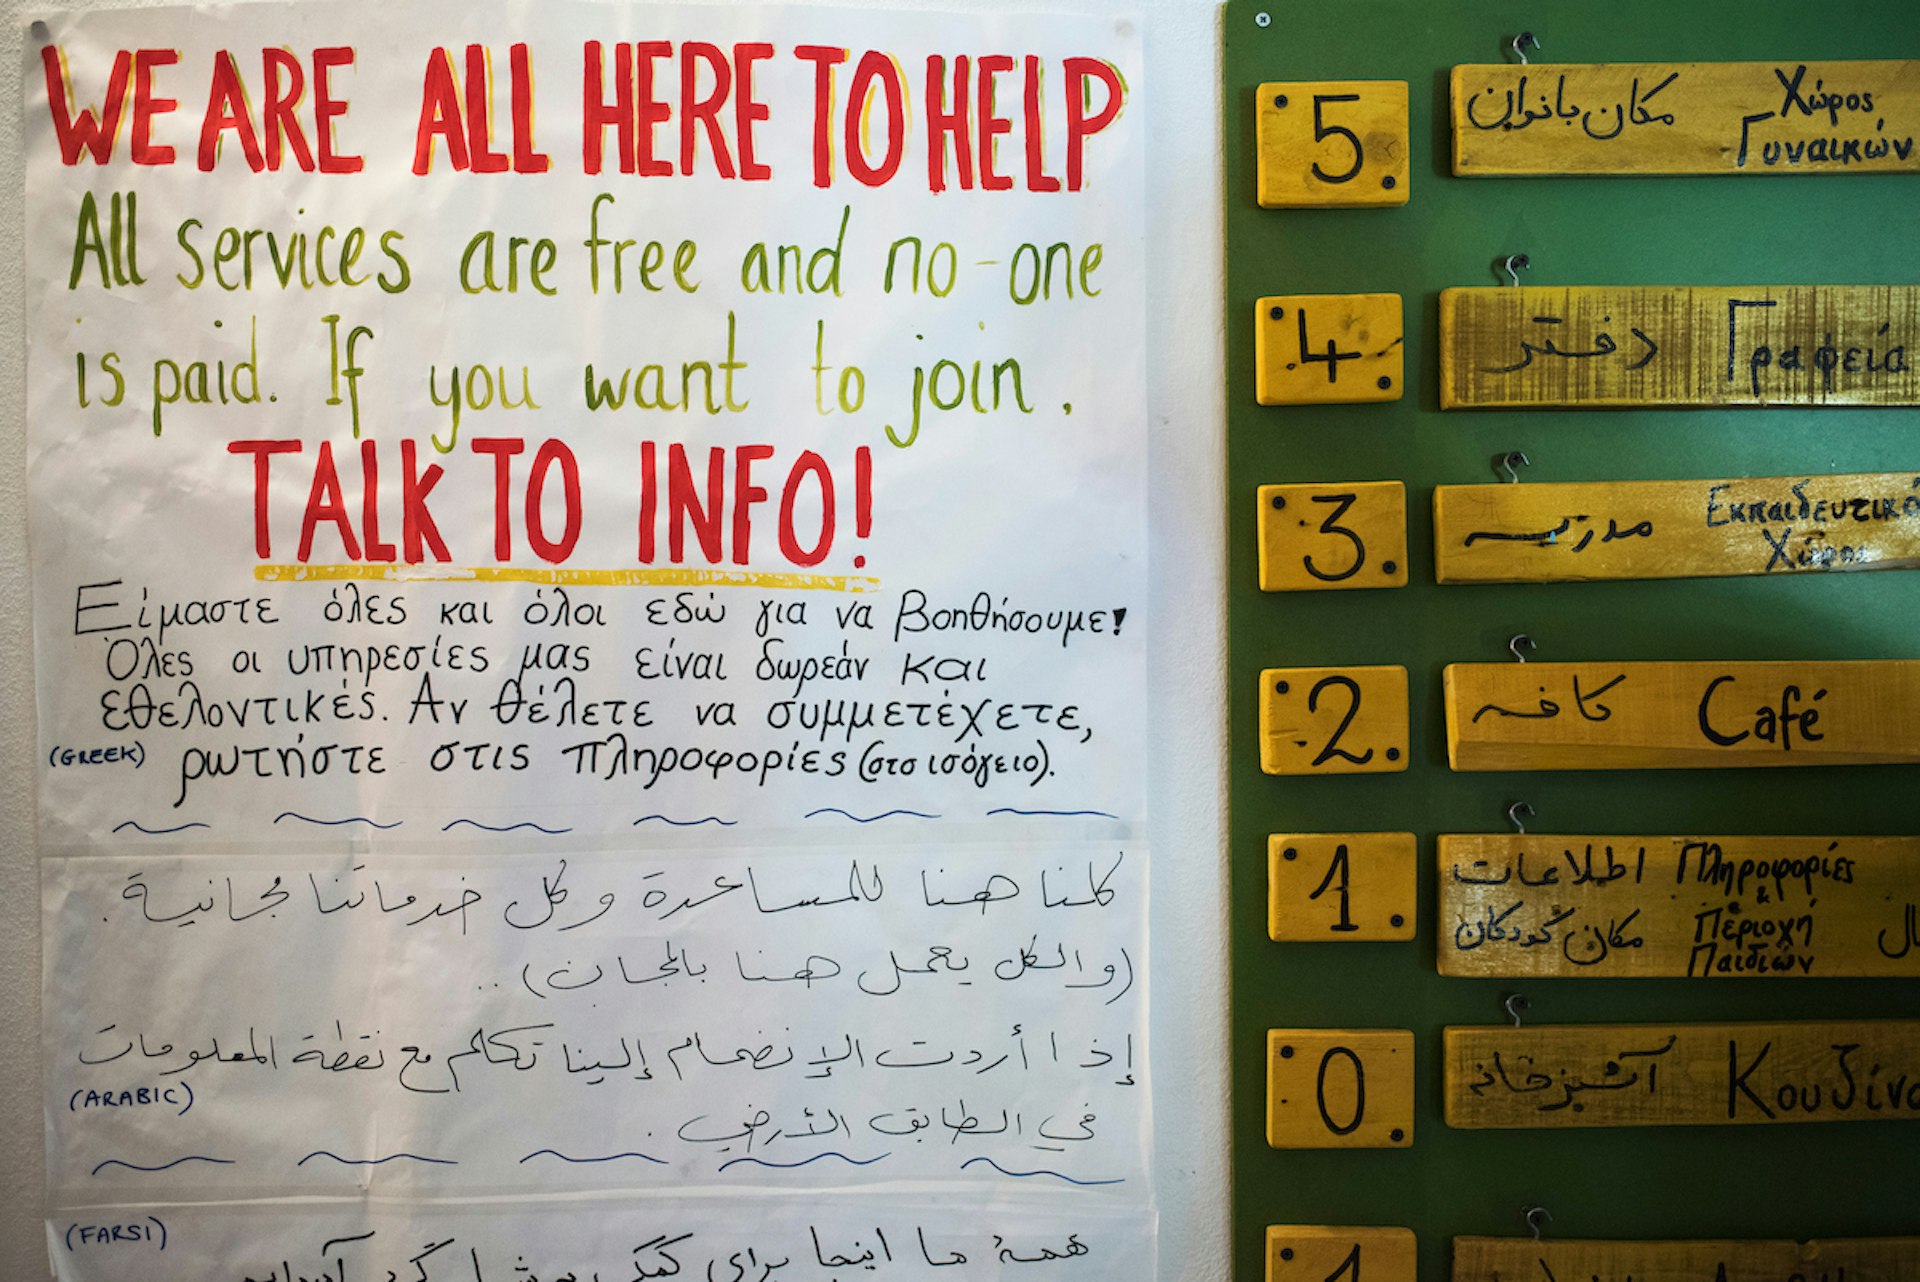 A notice board at Khora, refugee centre in Athens.